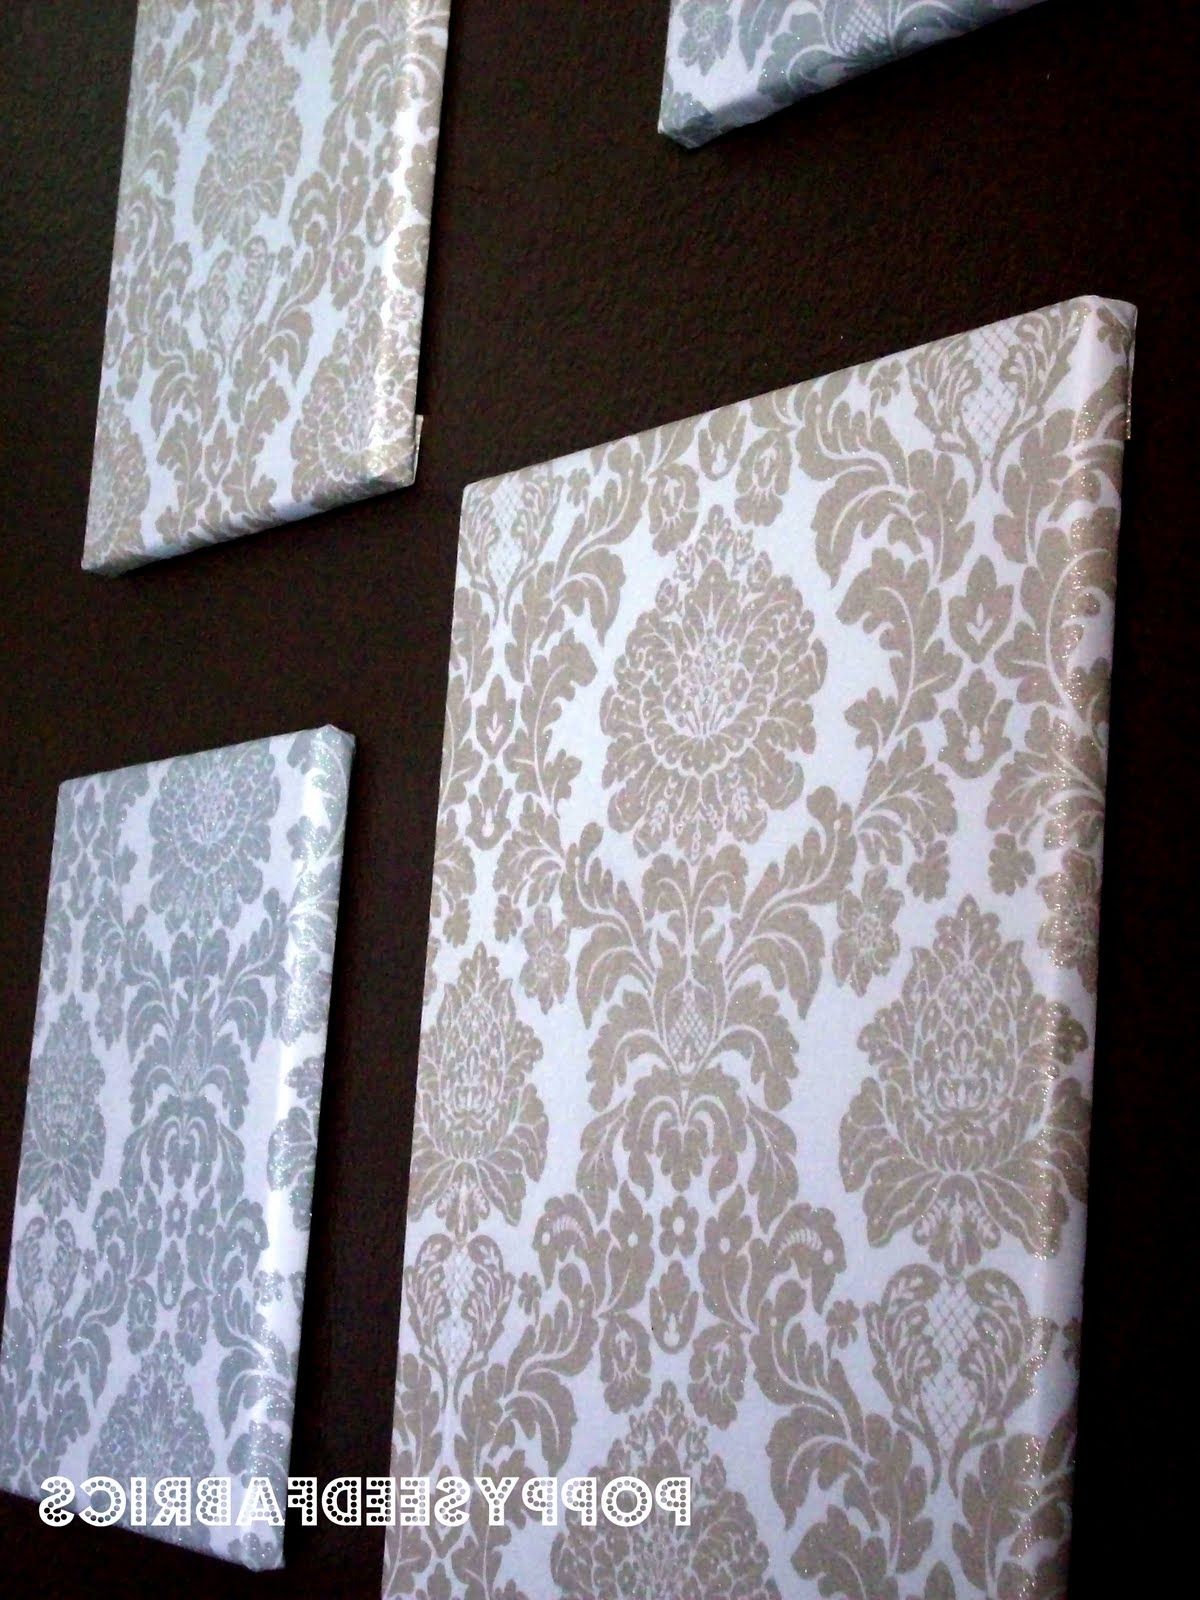 Poppyseed Fabrics: Fabric Wall Art Tutorial With Best And Newest Fabric Covered Wall Art (View 12 of 15)